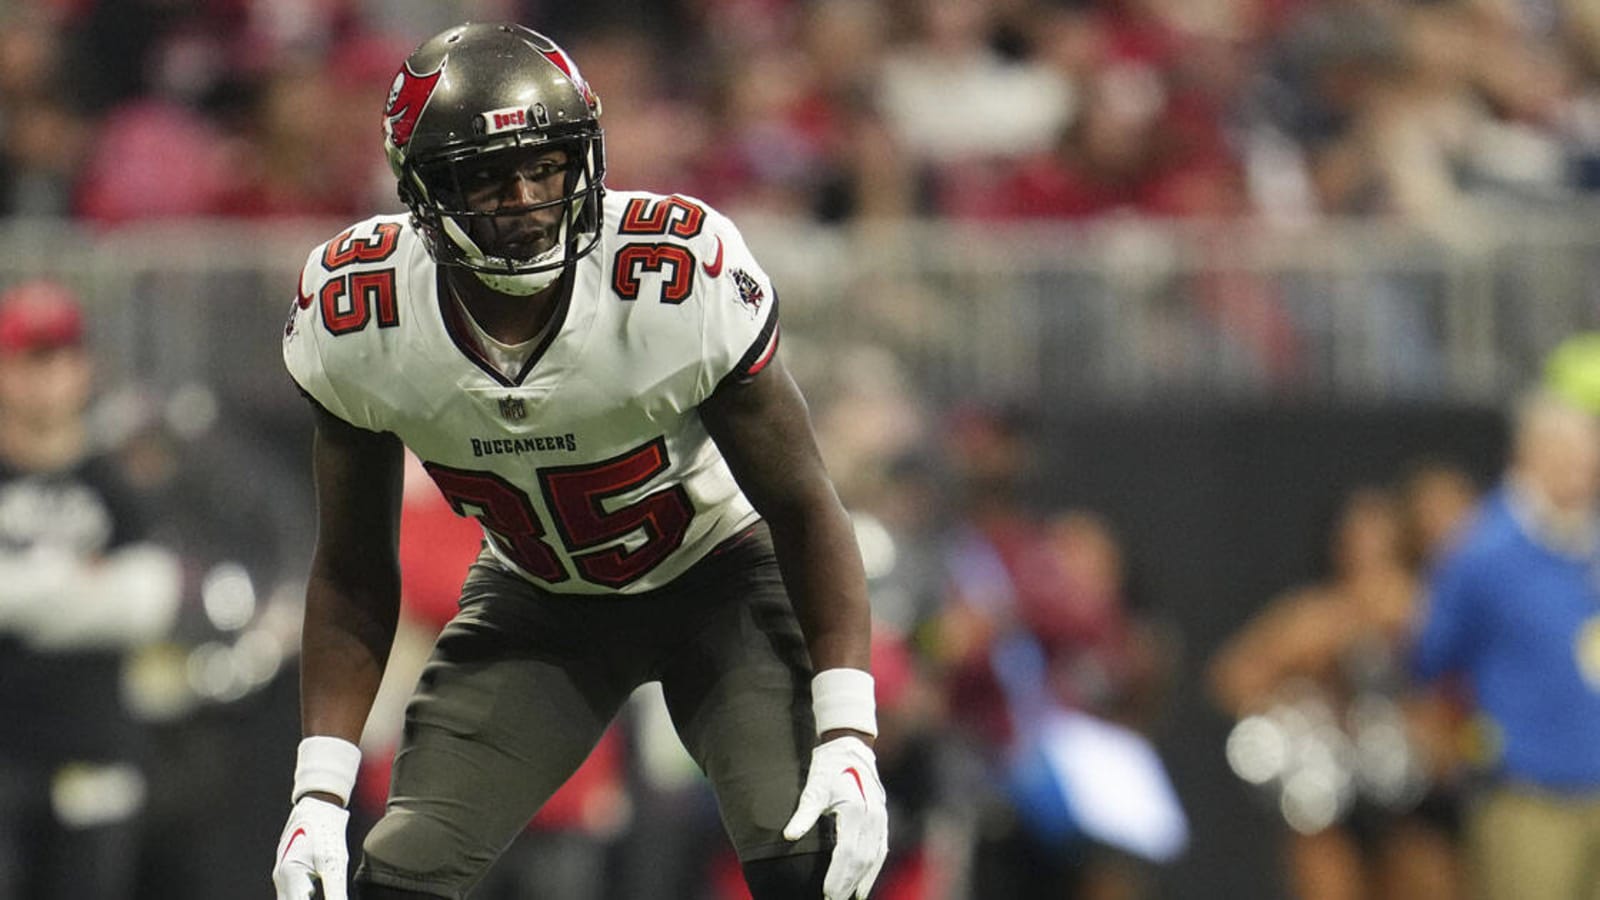 Buccaneers CB Jamel Dean carted off with lower back injury vs. Lions